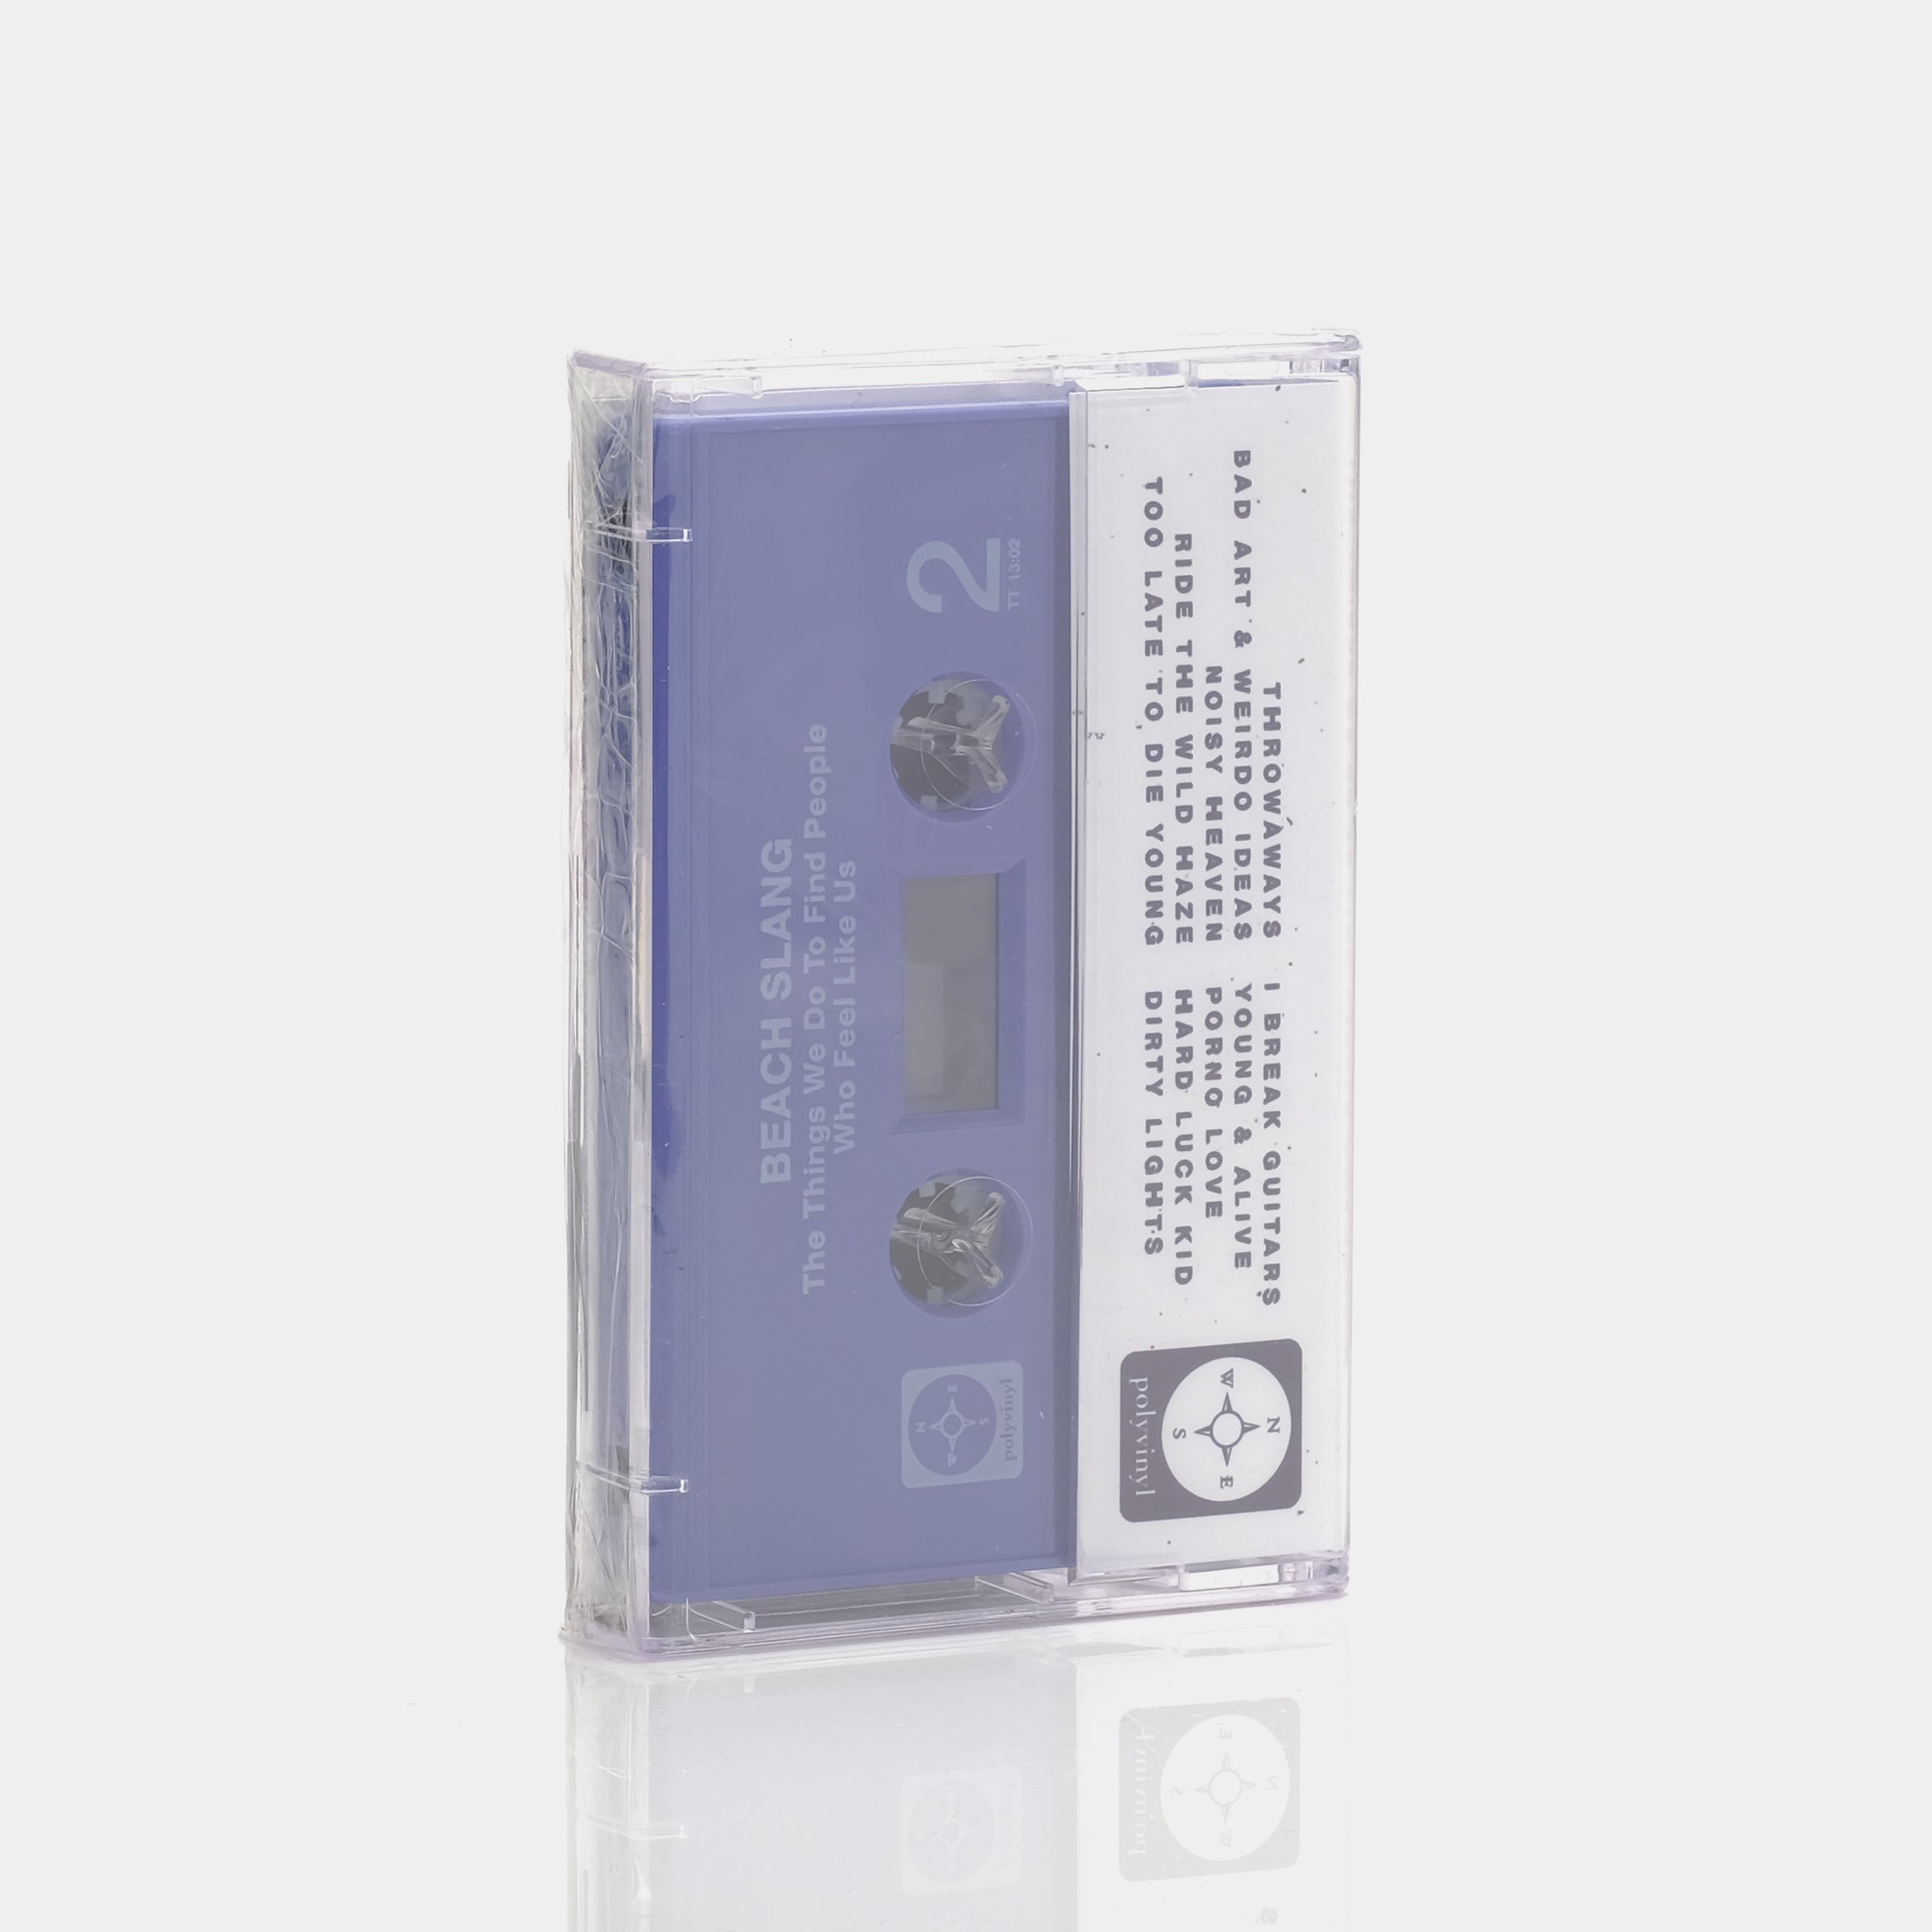 Beach Slang - The Things We Do To Find People Who Feel Like Us Cassette Tape